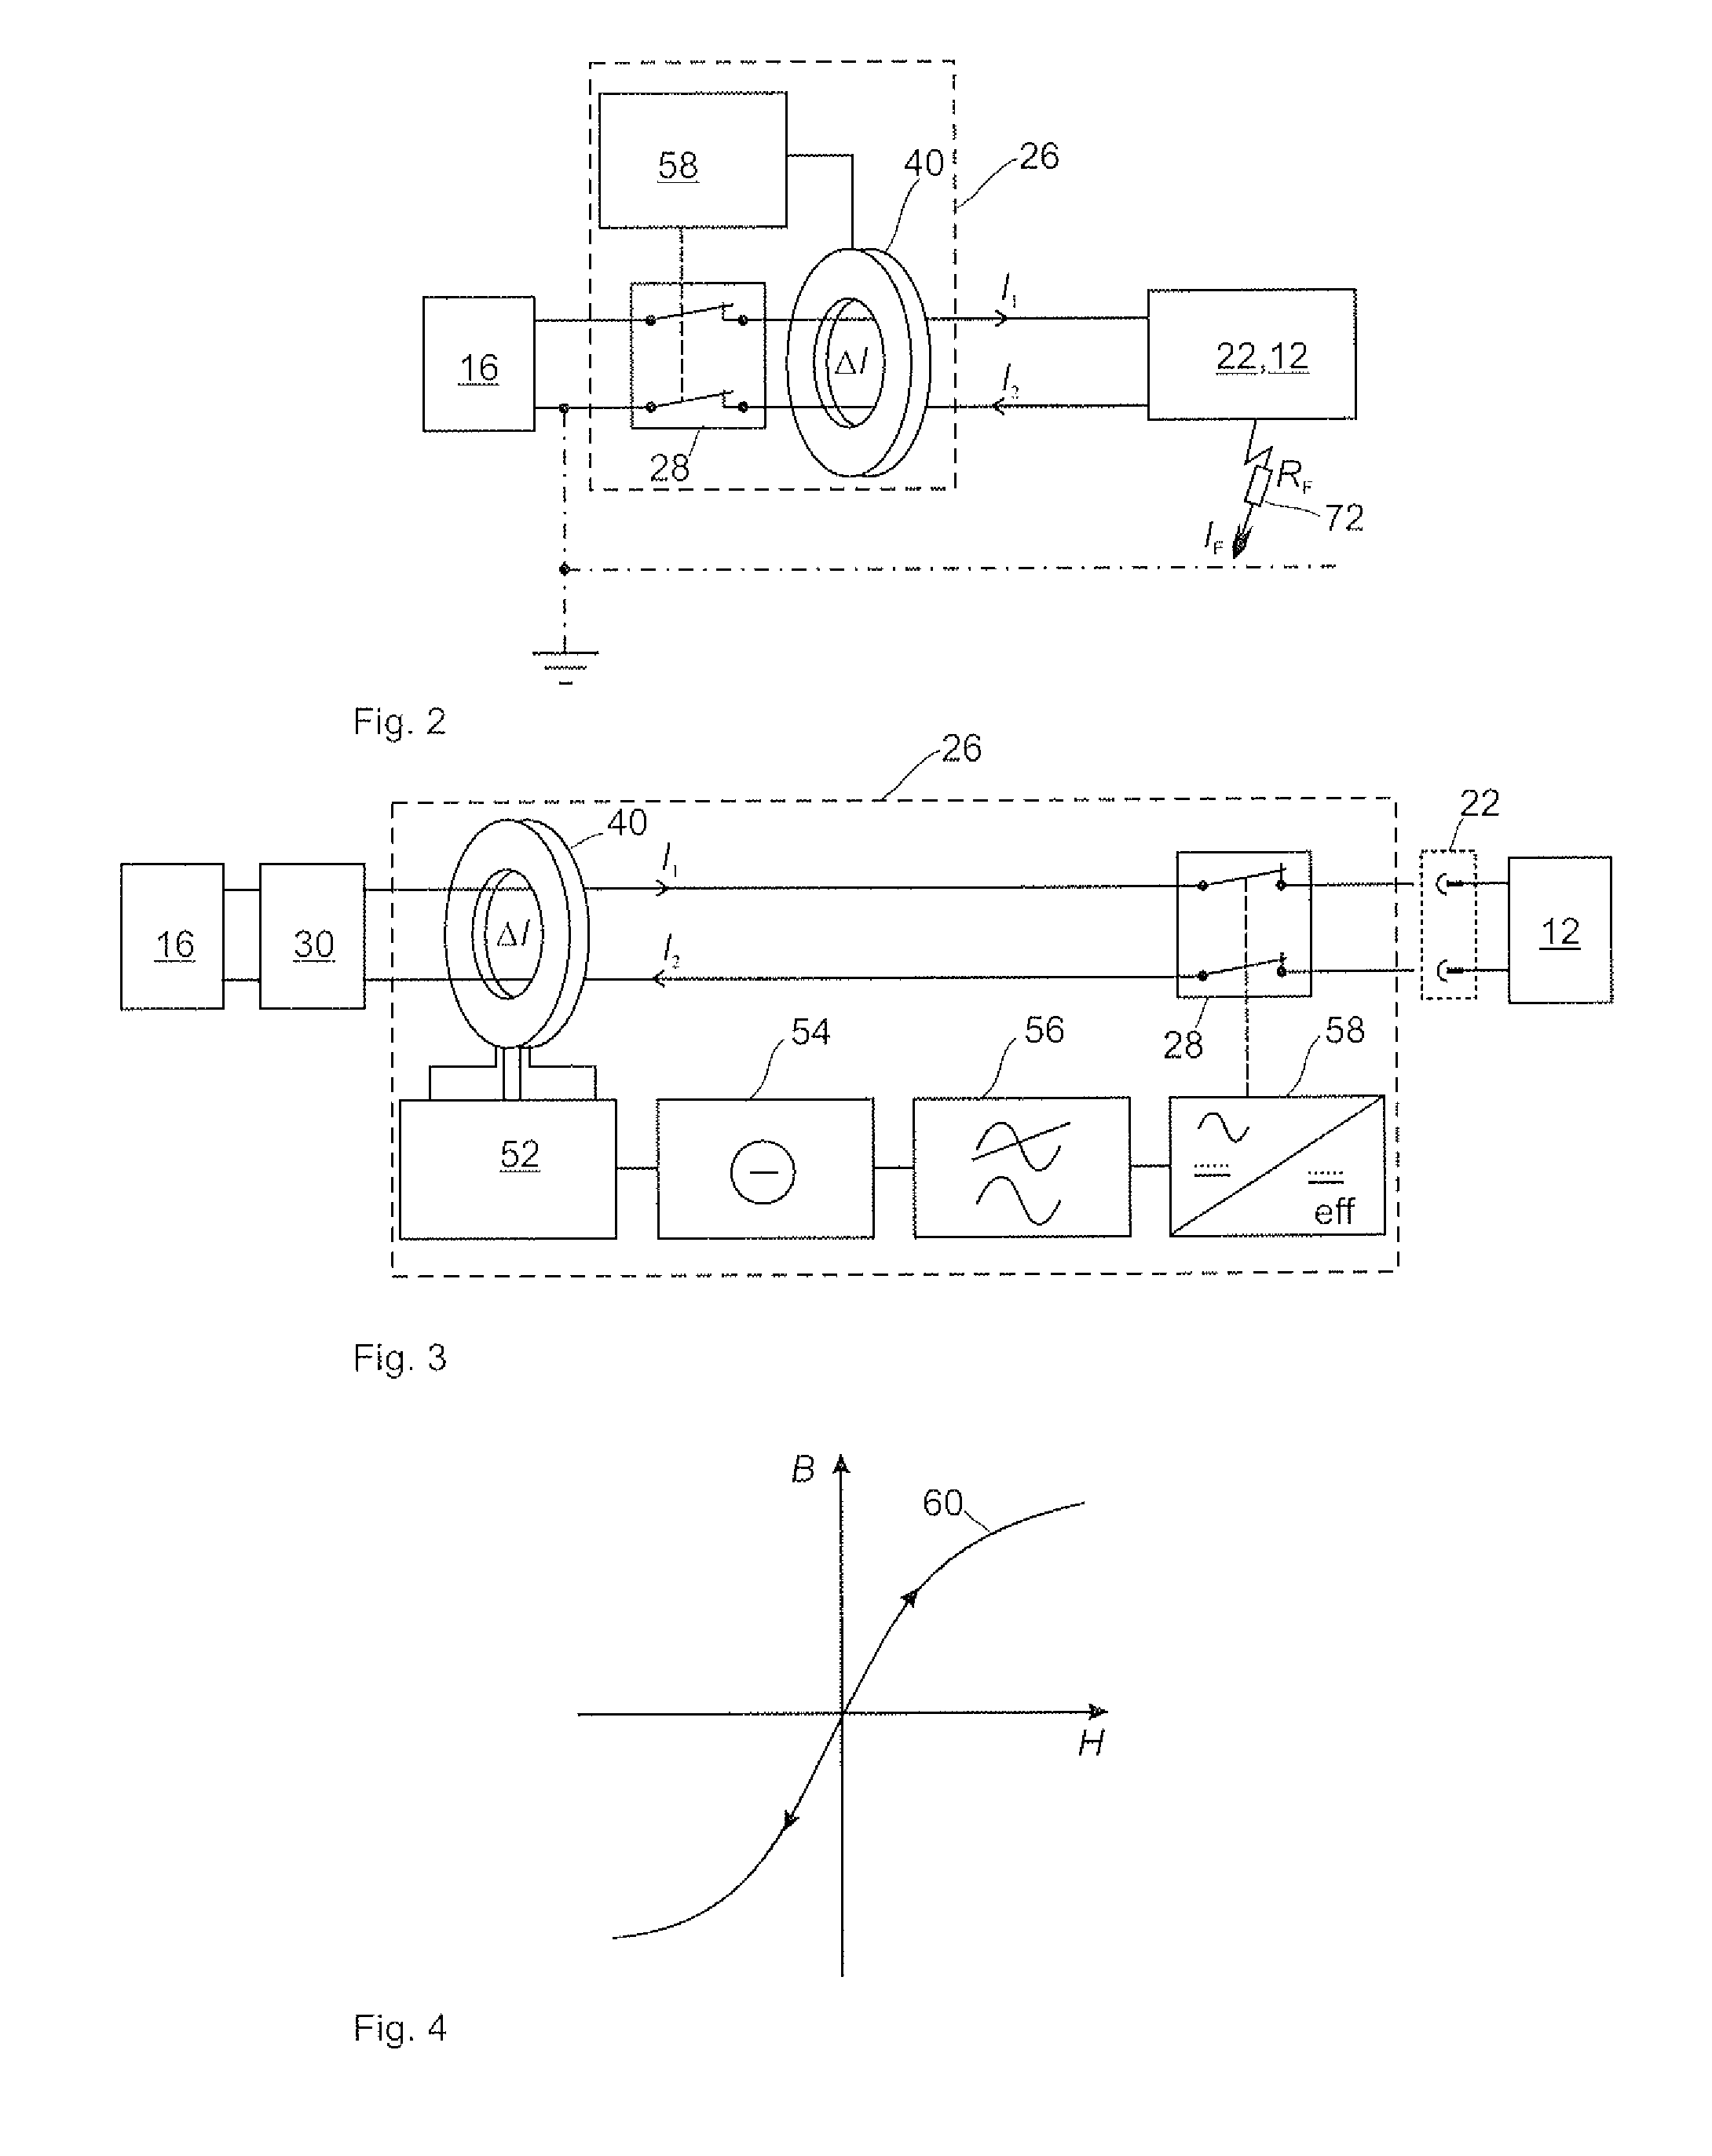 Power charging device for an electric vehicle